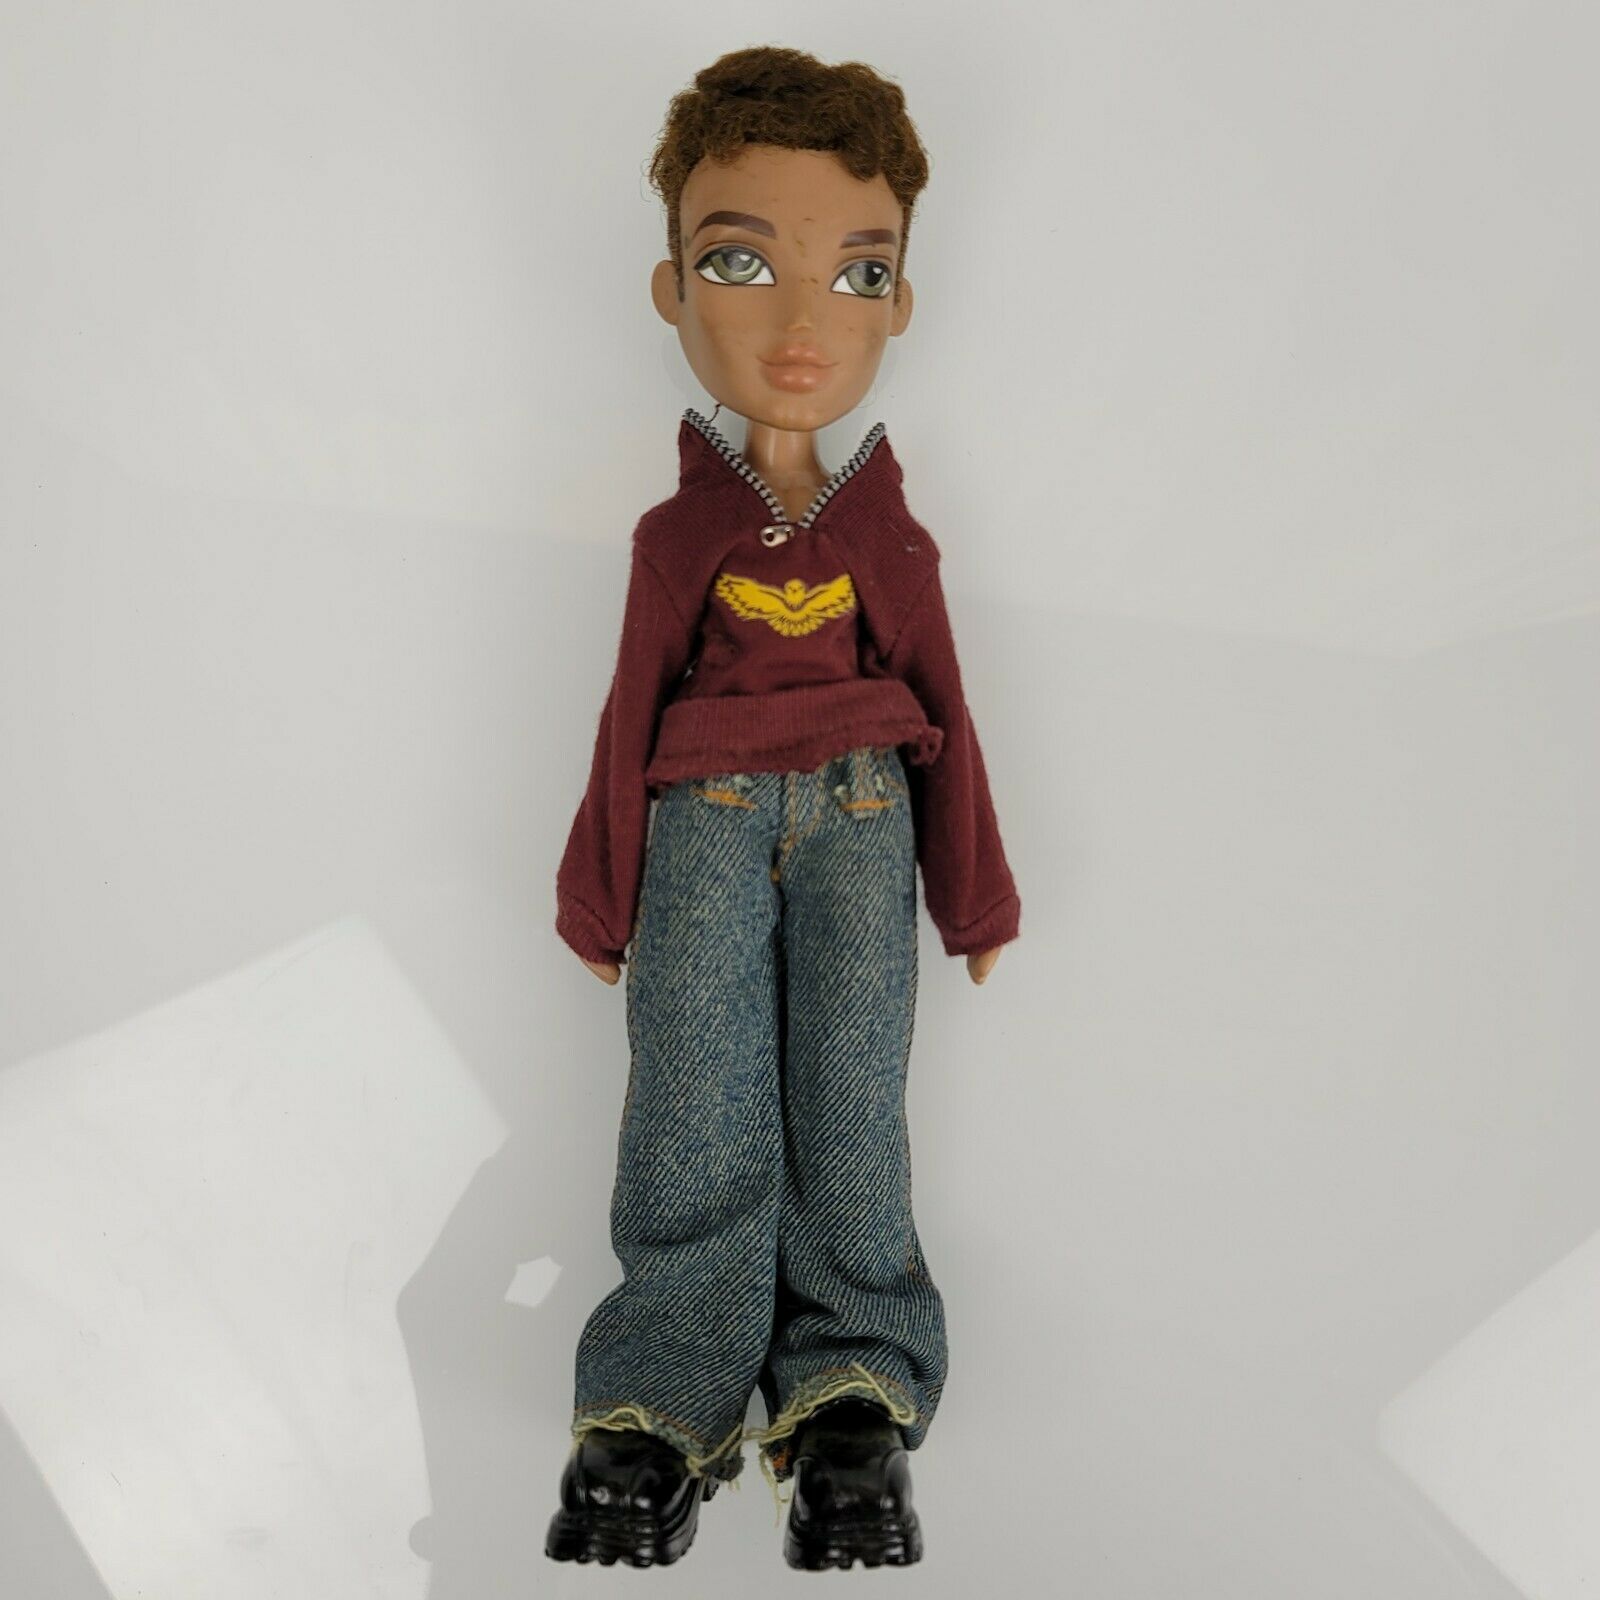 Bratz Boyz Nu Cool Dylan Doll Outfits Accessories MGA Entertainment 2003